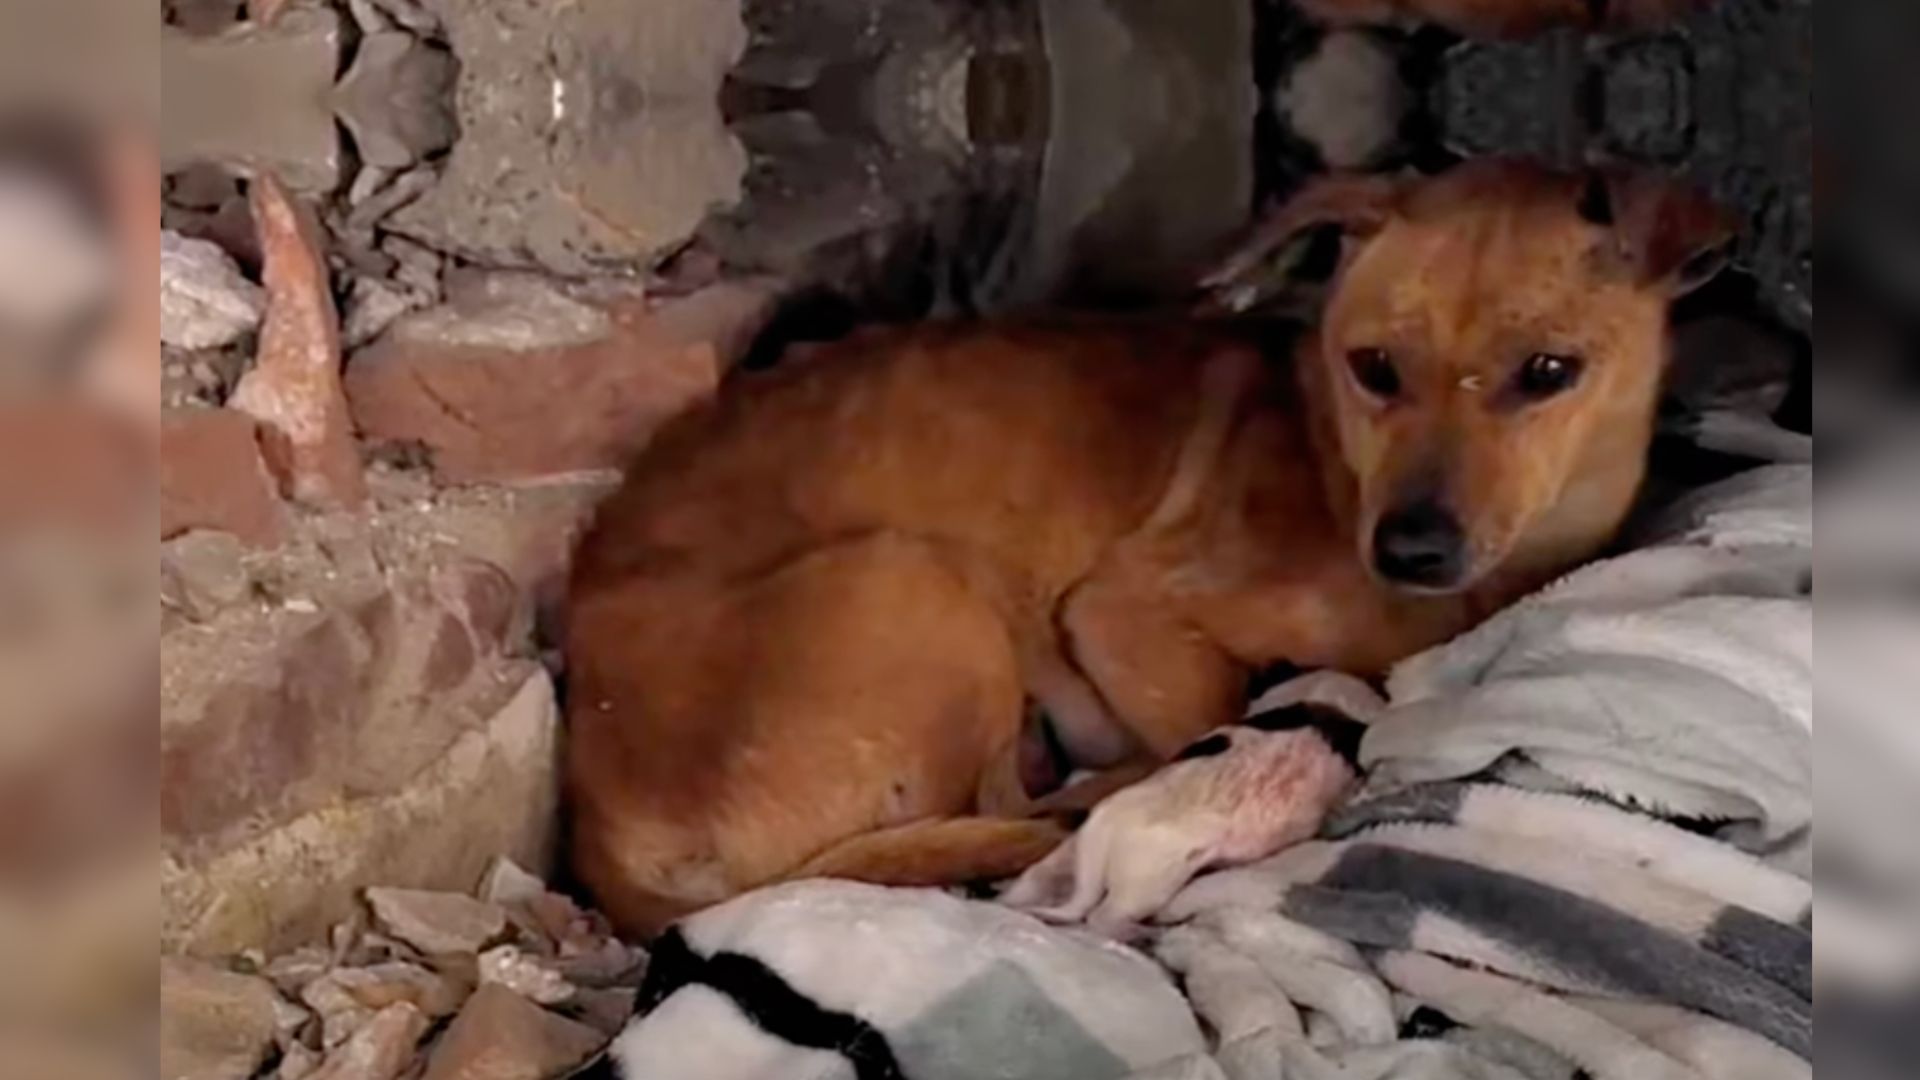 Mama Dog Was Trying To Save Her Puppies From Freezing By Asking Other Strangers For Help